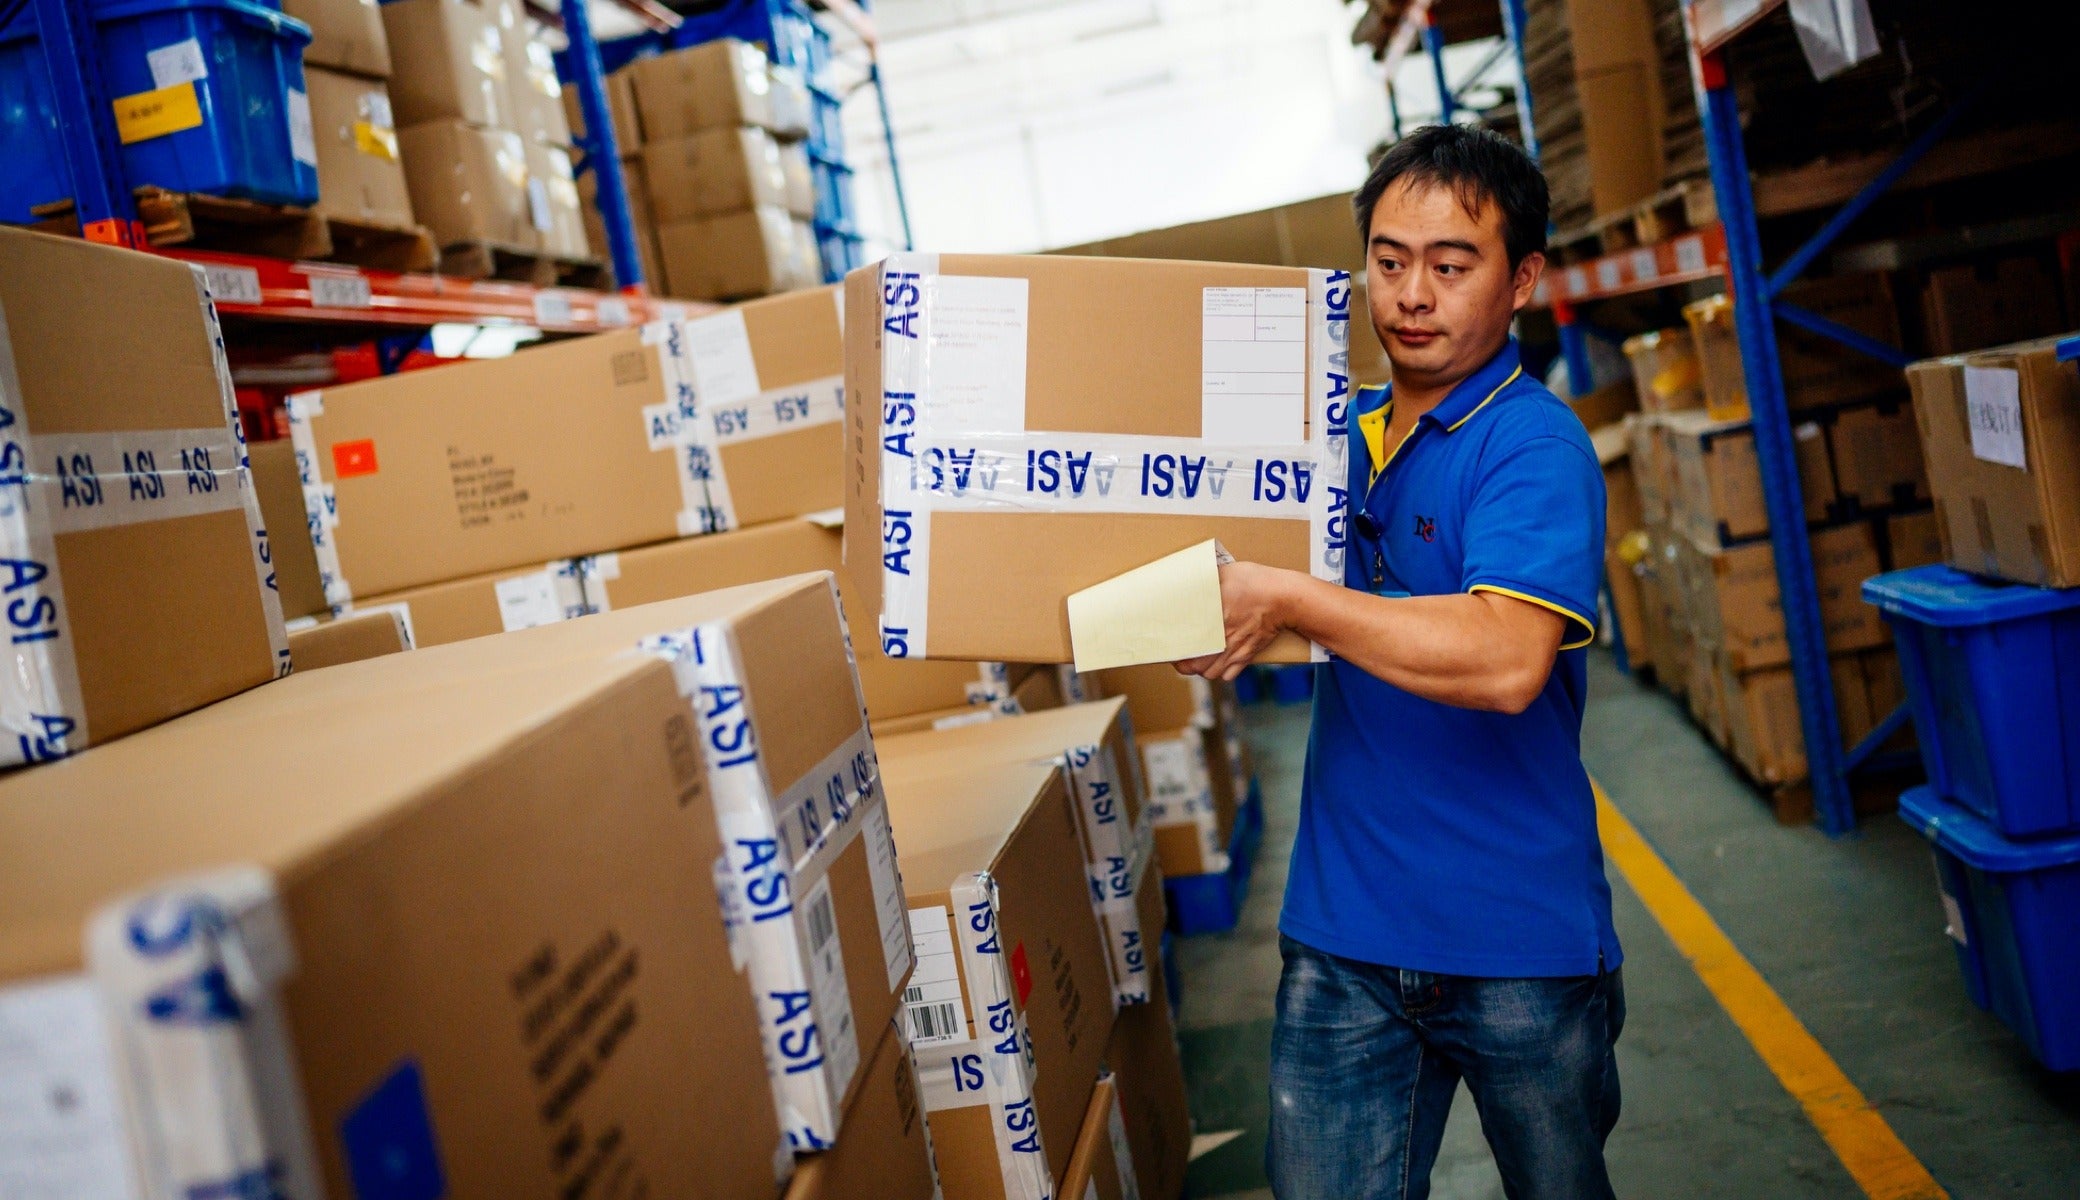 Fair Trade at ASI has enabled warehouse worker Zhu Fang to buy better groceries using the dividends 